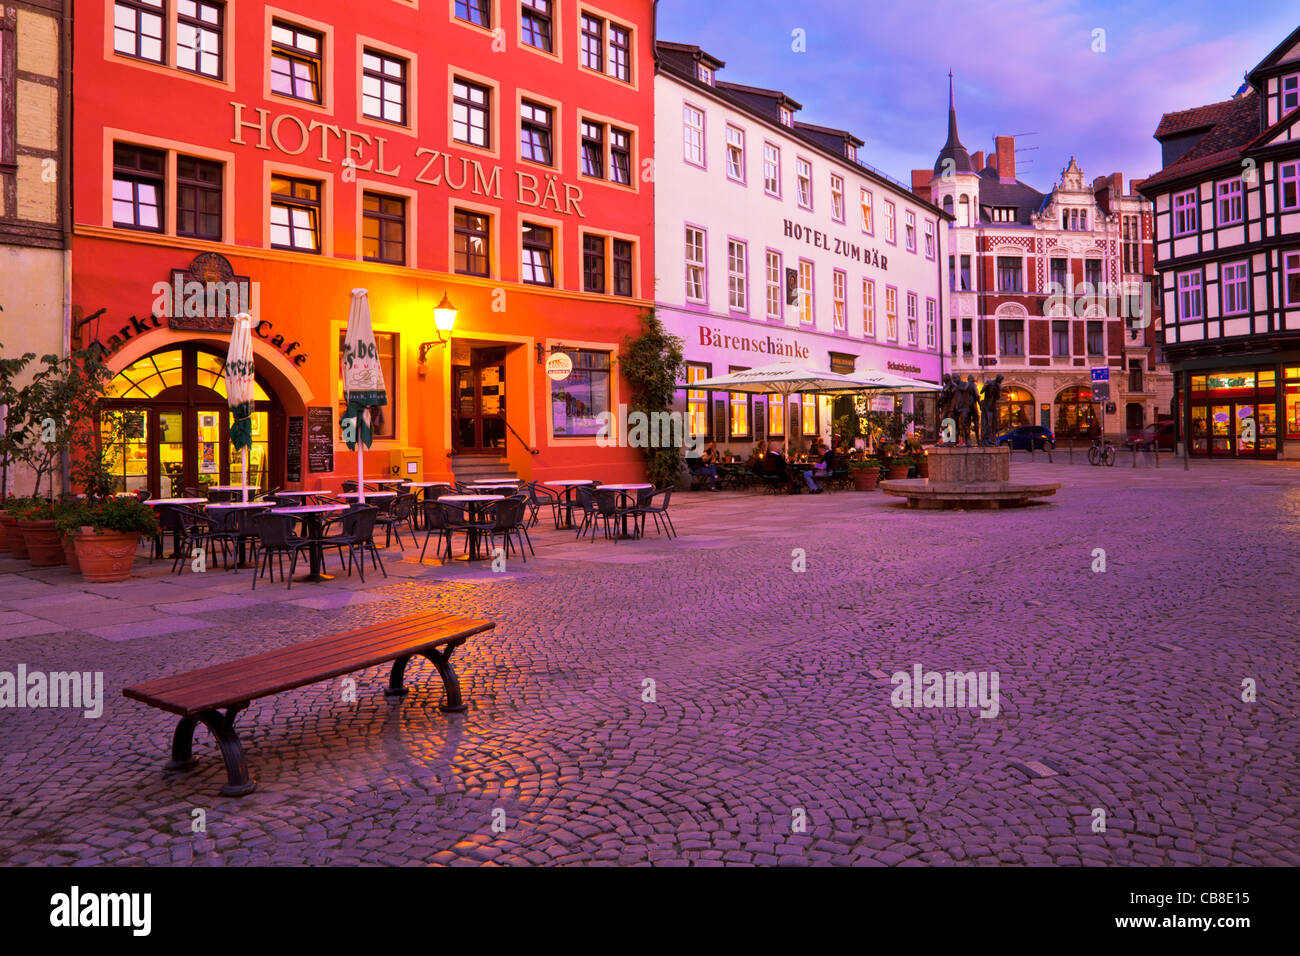 Twilight in the main market place or square, the Markt, in the UNESCO World Heritage site of Quedlinburg, Germany Stock Photo